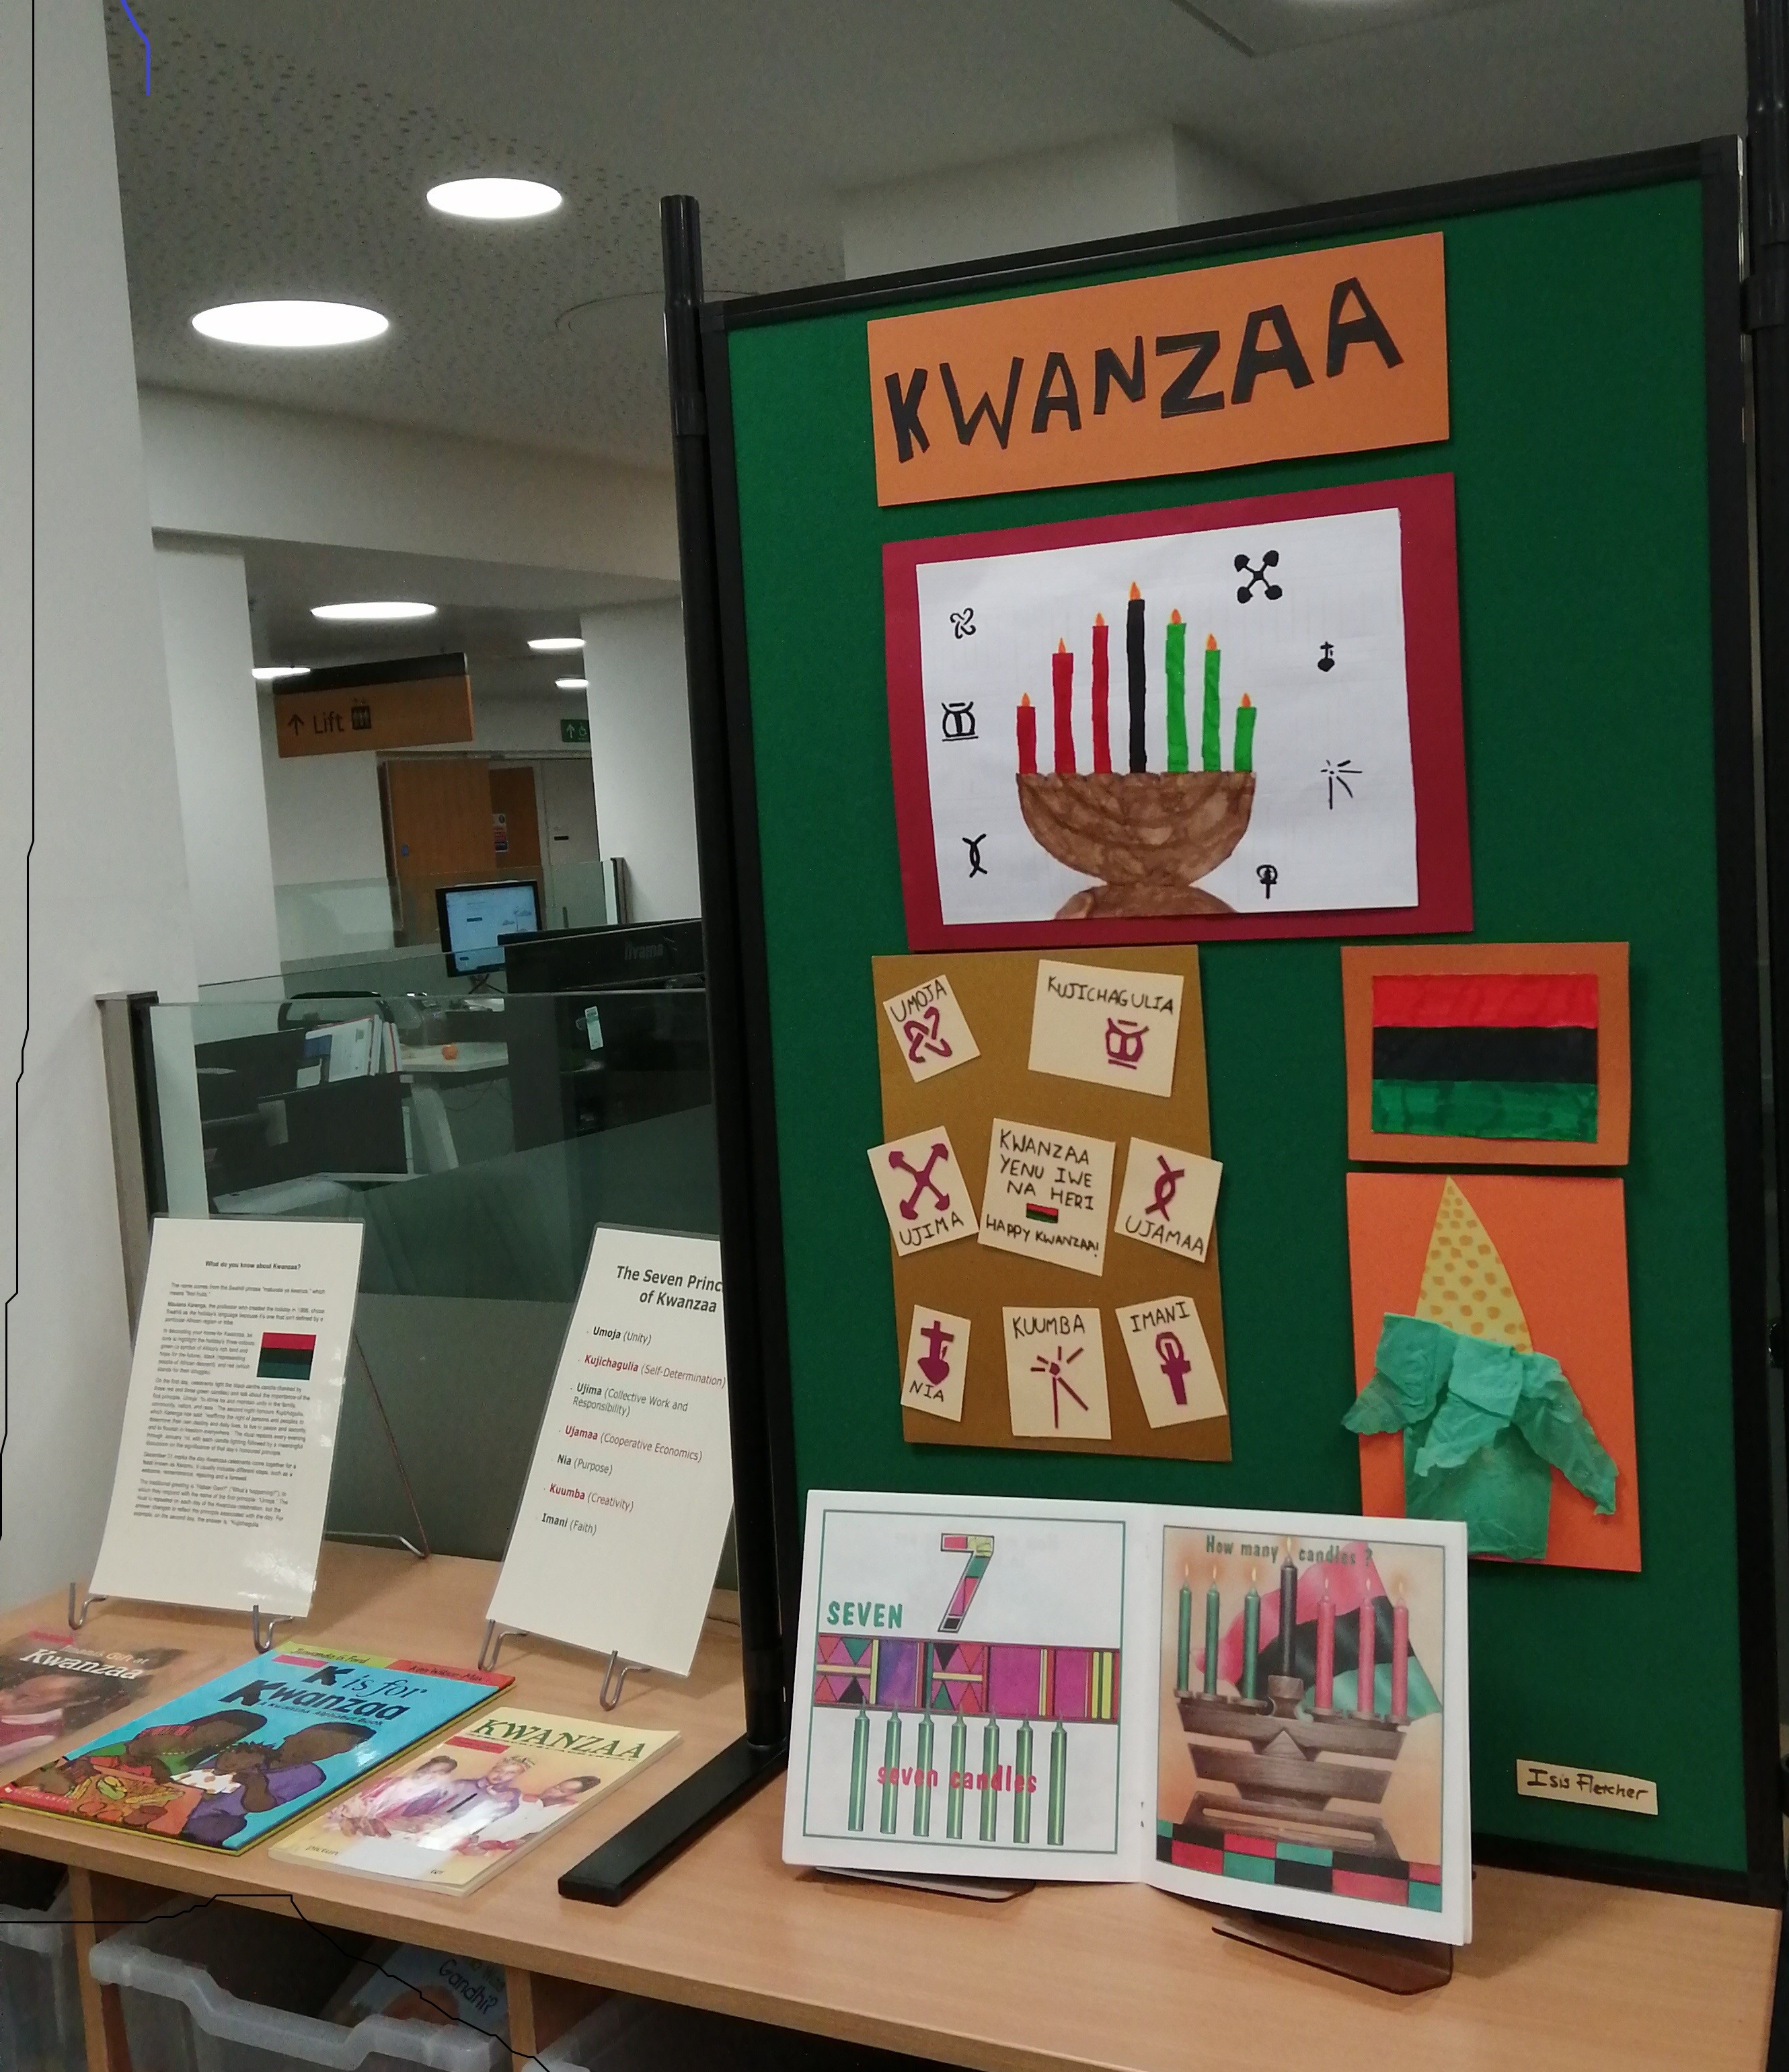 Kwanzaa  display in library including artwork of 7 branched candle and symbols of the 7 principles, books and information cards.